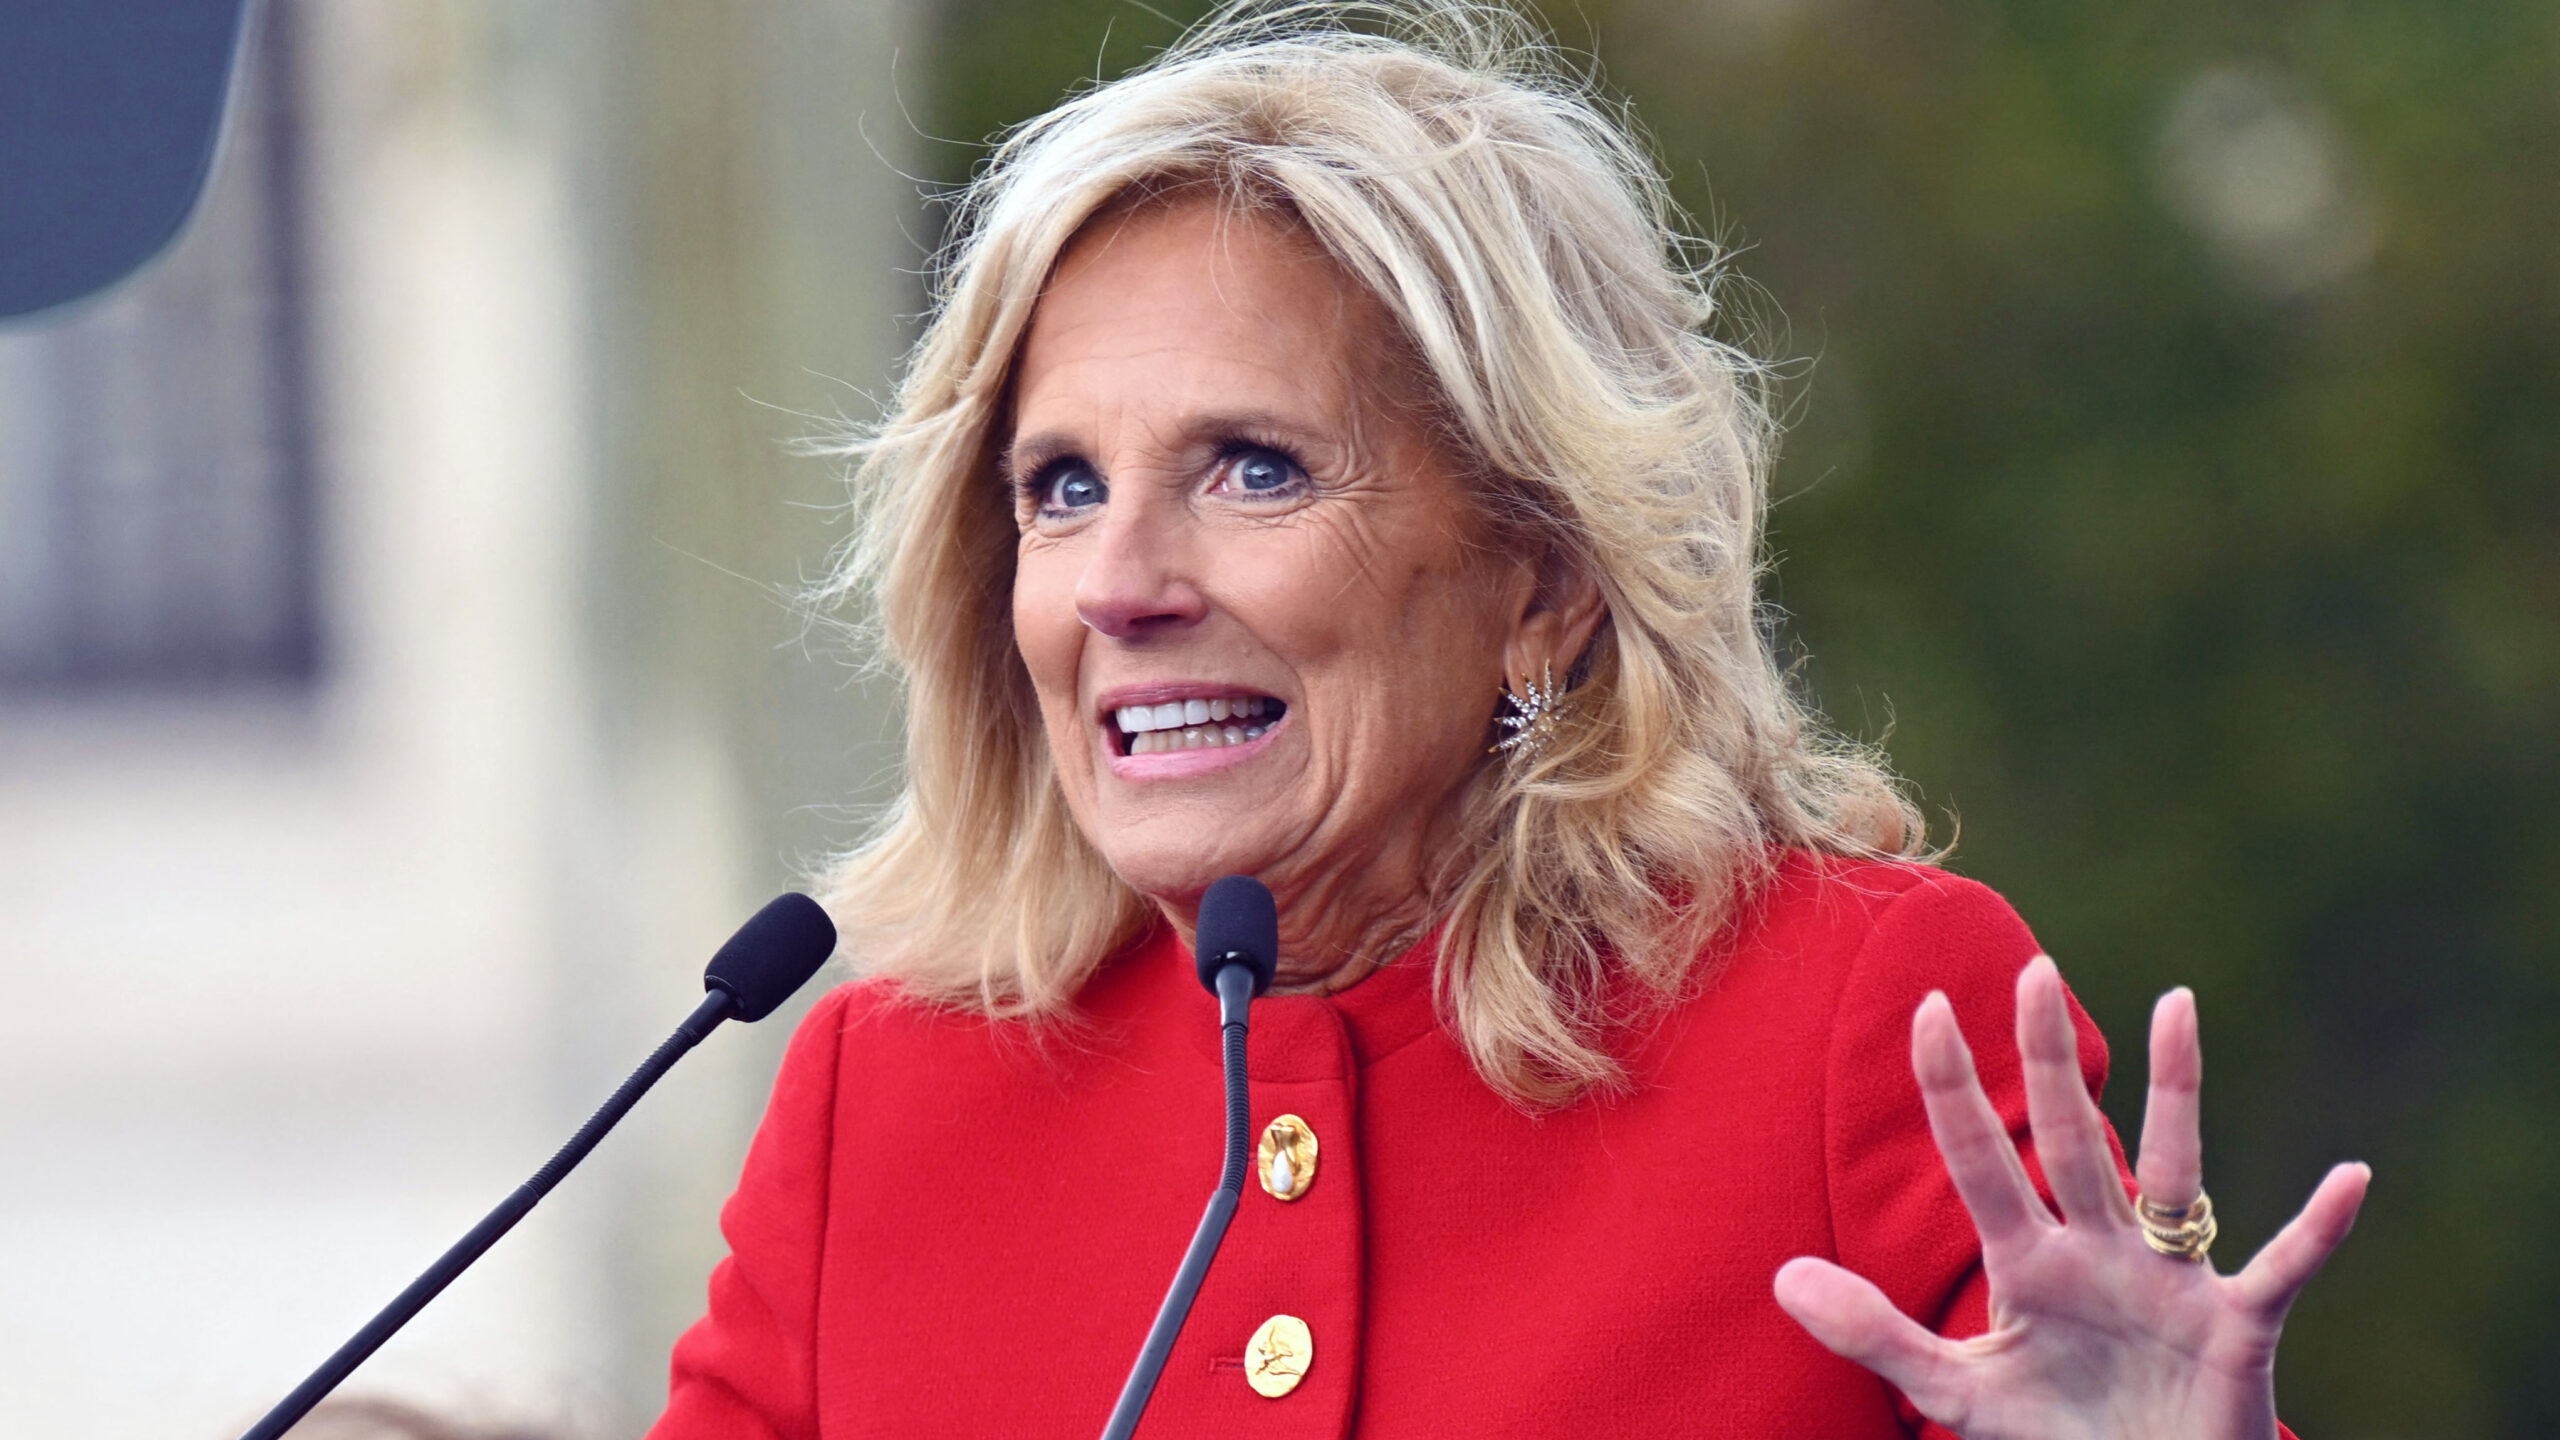 Jill Biden Reportedly Lashed Out At Biden Aides After Disastrous 2022 Press Conference: ‘Why Didn’t Anyone Stop That?’